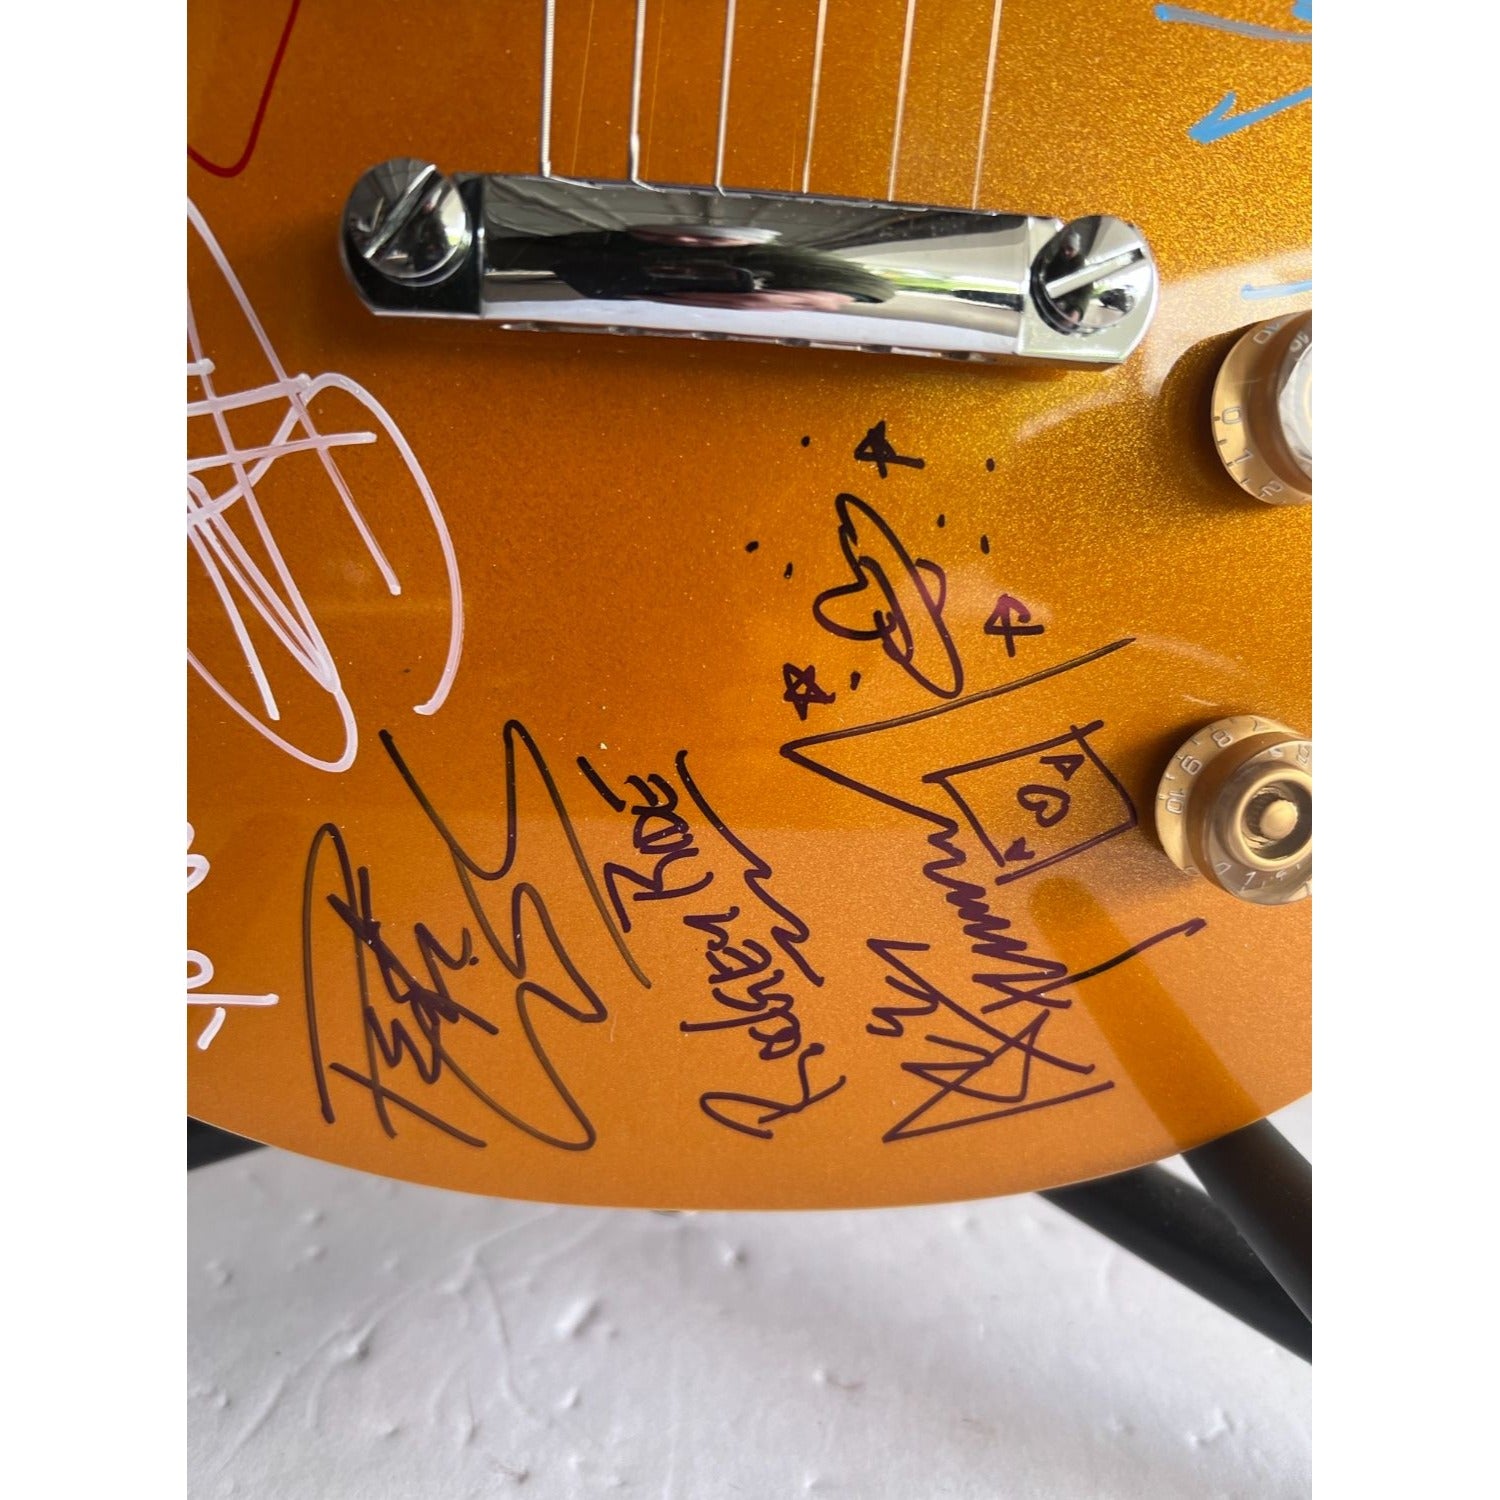 Kiss Gene Simmons Ace Frehley Paul Stanley Eric Singer Tommy Thayer Vinnie Vincent Les Paul Gold full size electric guitar signed with proof